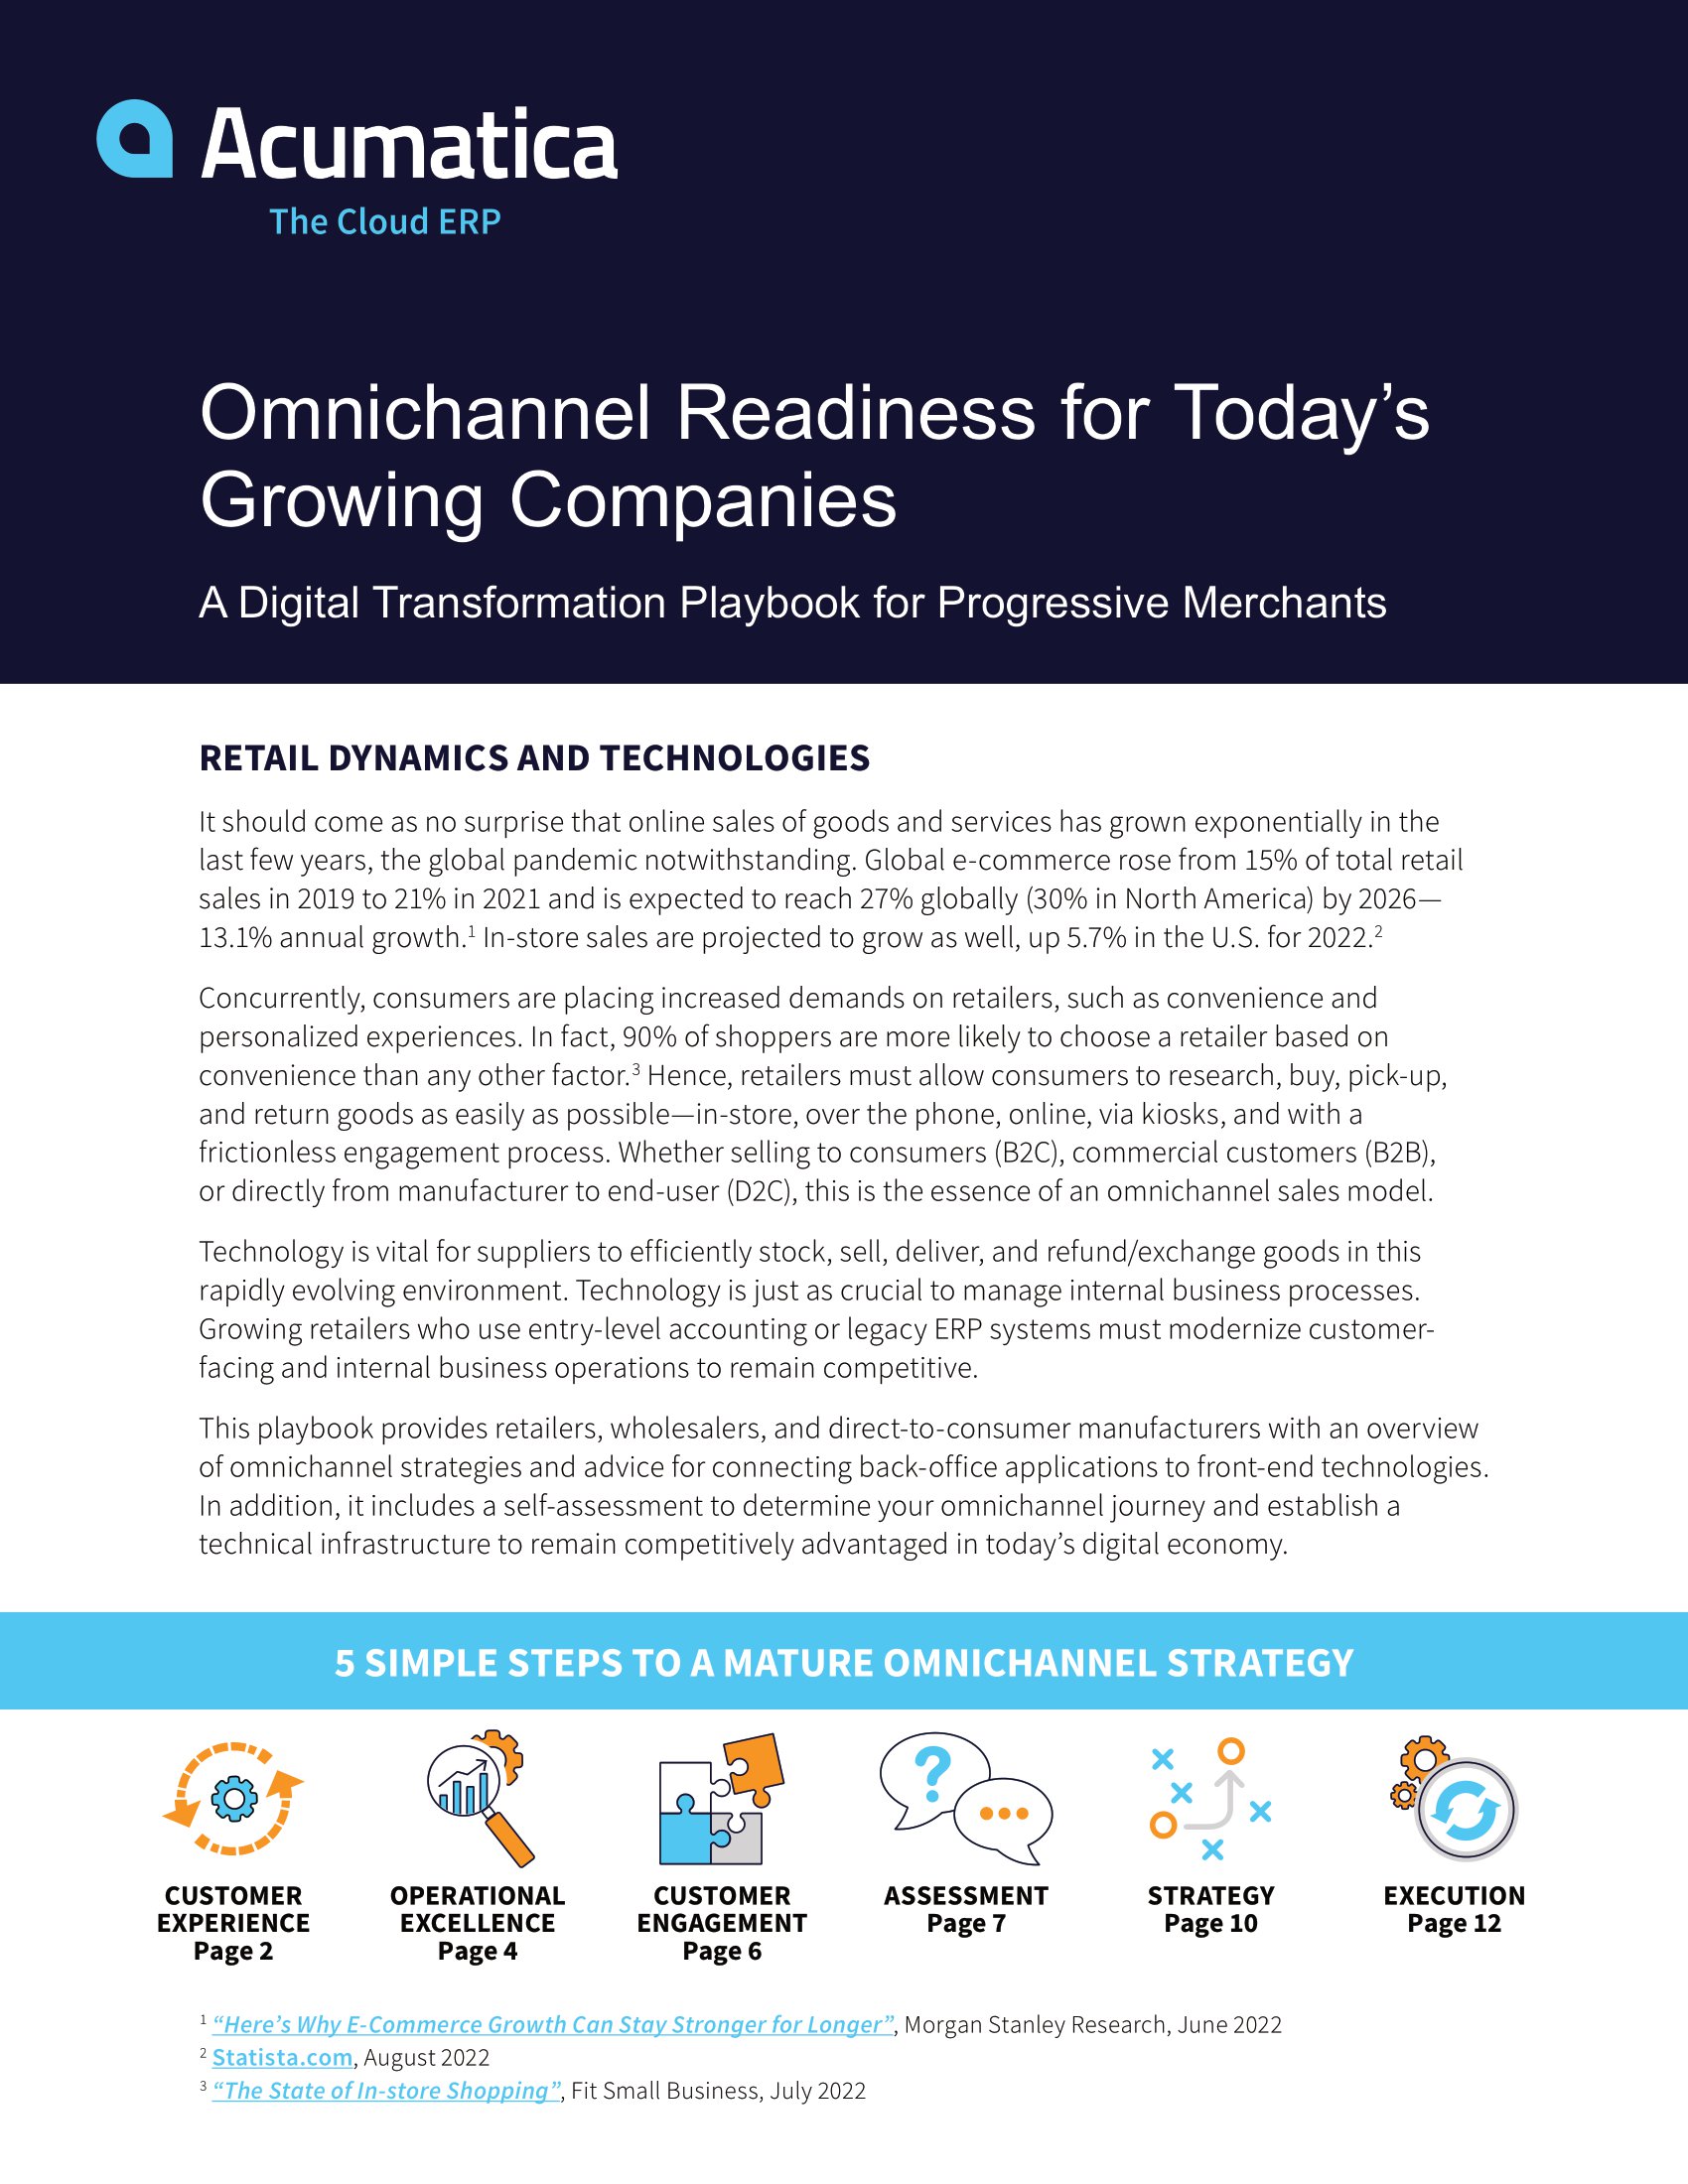 Assess Your Omnichannel Readiness with Acumatica’s New Playbook